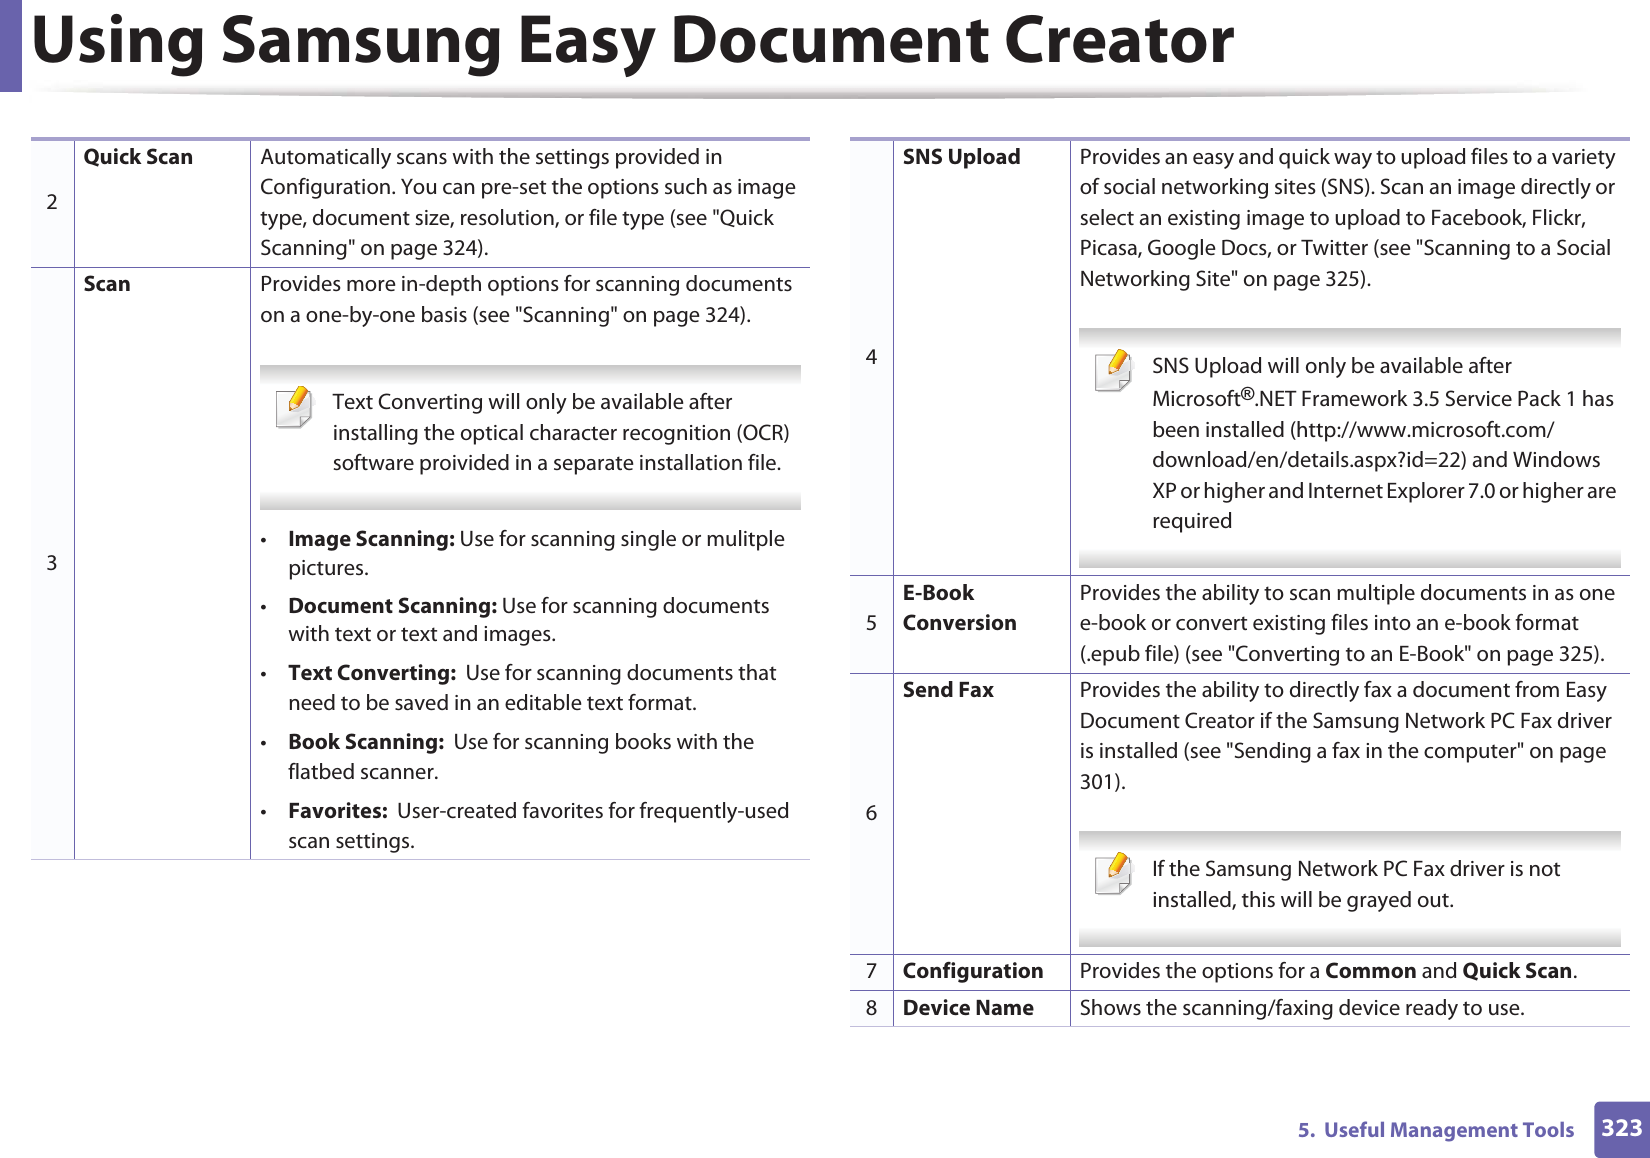 Using Samsung Easy Document Creator3235.  Useful Management Tools2Quick Scan Automatically scans with the settings provided in Configuration. You can pre-set the options such as image type, document size, resolution, or file type (see &quot;Quick Scanning&quot; on page 324).3Scan Provides more in-depth options for scanning documents on a one-by-one basis (see &quot;Scanning&quot; on page 324). Text Converting will only be available after installing the optical character recognition (OCR) software proivided in a separate installation file. •Image Scanning: Use for scanning single or mulitple pictures.•Document Scanning: Use for scanning documents with text or text and images.•Text Converting:  Use for scanning documents that need to be saved in an editable text format.•Book Scanning:  Use for scanning books with the flatbed scanner.•Favorites:  User-created favorites for frequently-used scan settings.4SNS Upload Provides an easy and quick way to upload files to a variety of social networking sites (SNS). Scan an image directly or select an existing image to upload to Facebook, Flickr, Picasa, Google Docs, or Twitter (see &quot;Scanning to a Social Networking Site&quot; on page 325). SNS Upload will only be available after Microsoft®.NET Framework 3.5 Service Pack 1 has been installed (http://www.microsoft.com/download/en/details.aspx?id=22) and Windows XP or higher and Internet Explorer 7.0 or higher are required 5E-Book ConversionProvides the ability to scan multiple documents in as one e-book or convert existing files into an e-book format (.epub file) (see &quot;Converting to an E-Book&quot; on page 325).6Send Fax Provides the ability to directly fax a document from Easy Document Creator if the Samsung Network PC Fax driver is installed (see &quot;Sending a fax in the computer&quot; on page 301). If the Samsung Network PC Fax driver is not installed, this will be grayed out. 7Configuration Provides the options for a Common and Quick Scan.8Device Name Shows the scanning/faxing device ready to use.